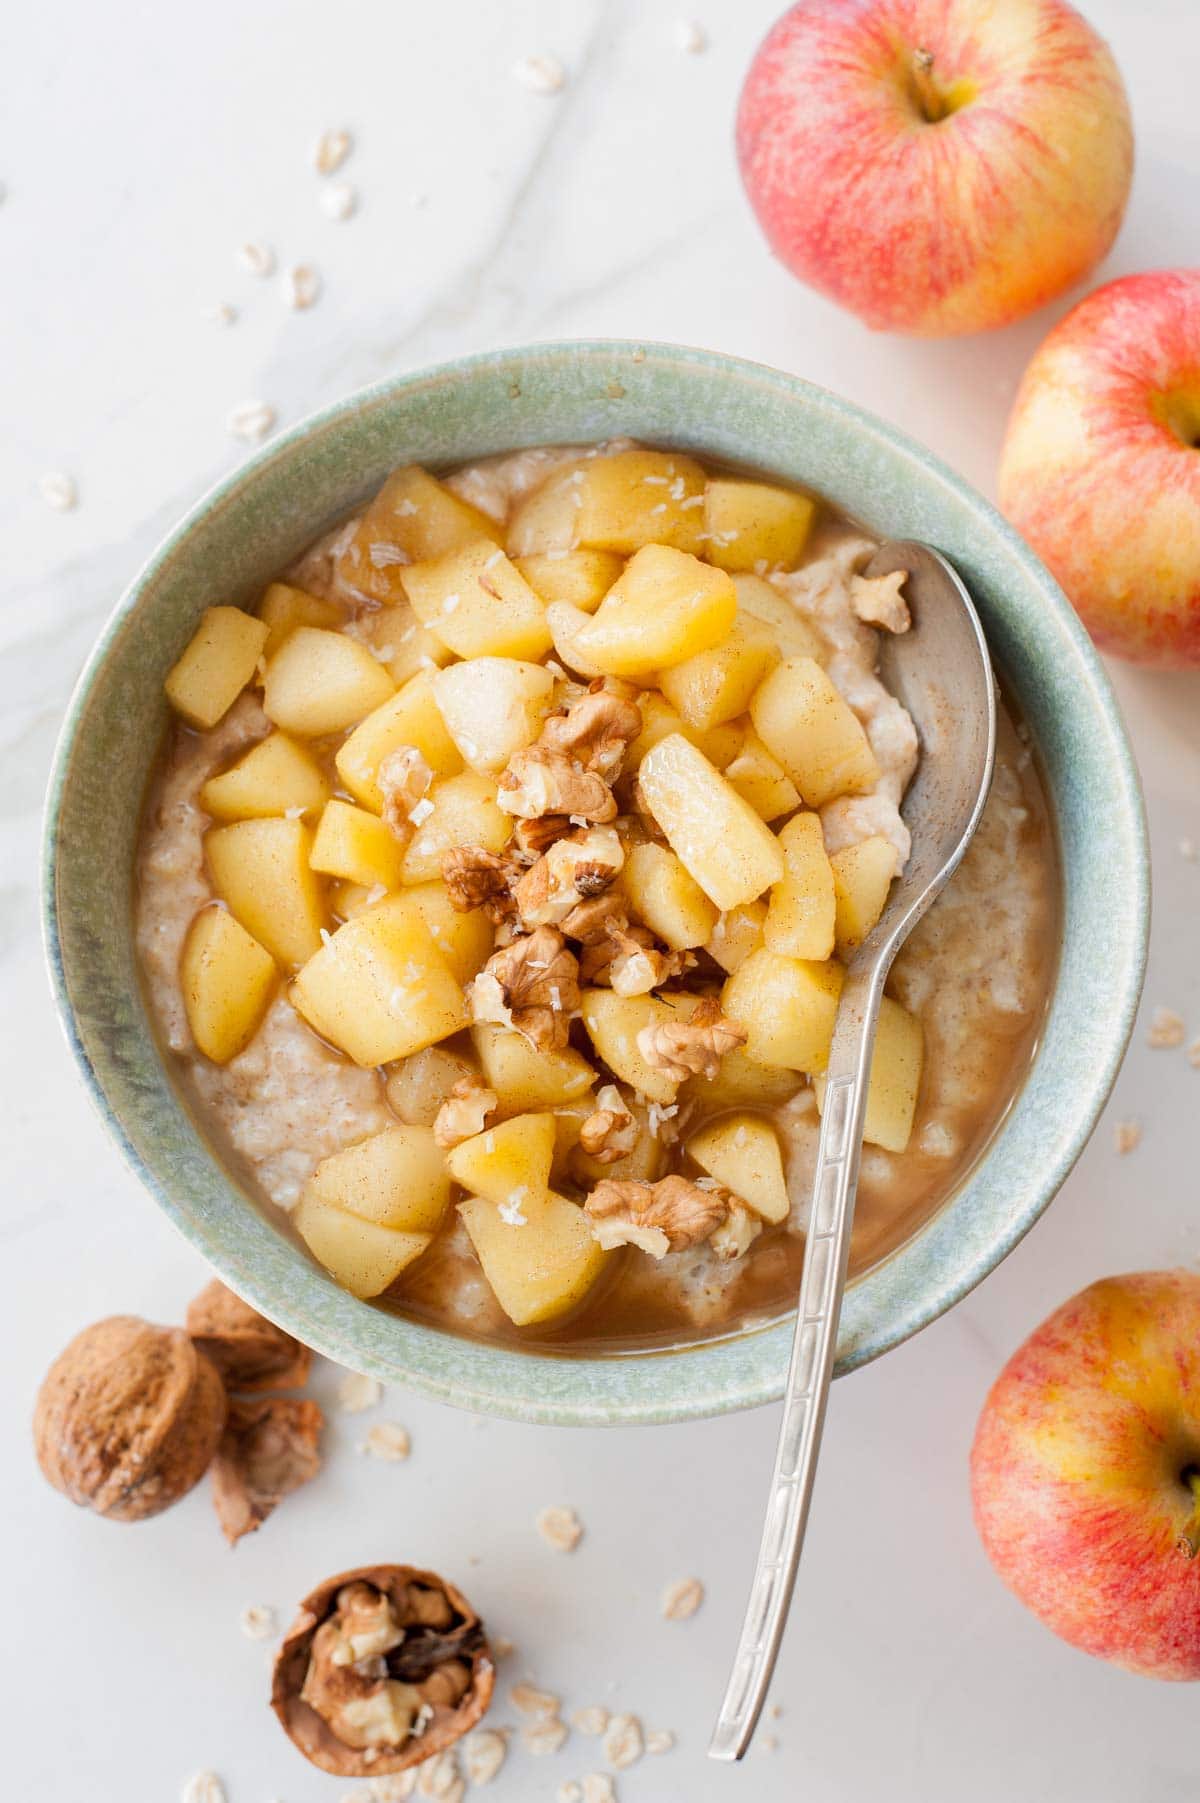 Apple cinnamon oatmeal in a green bowl topped with walnuts.